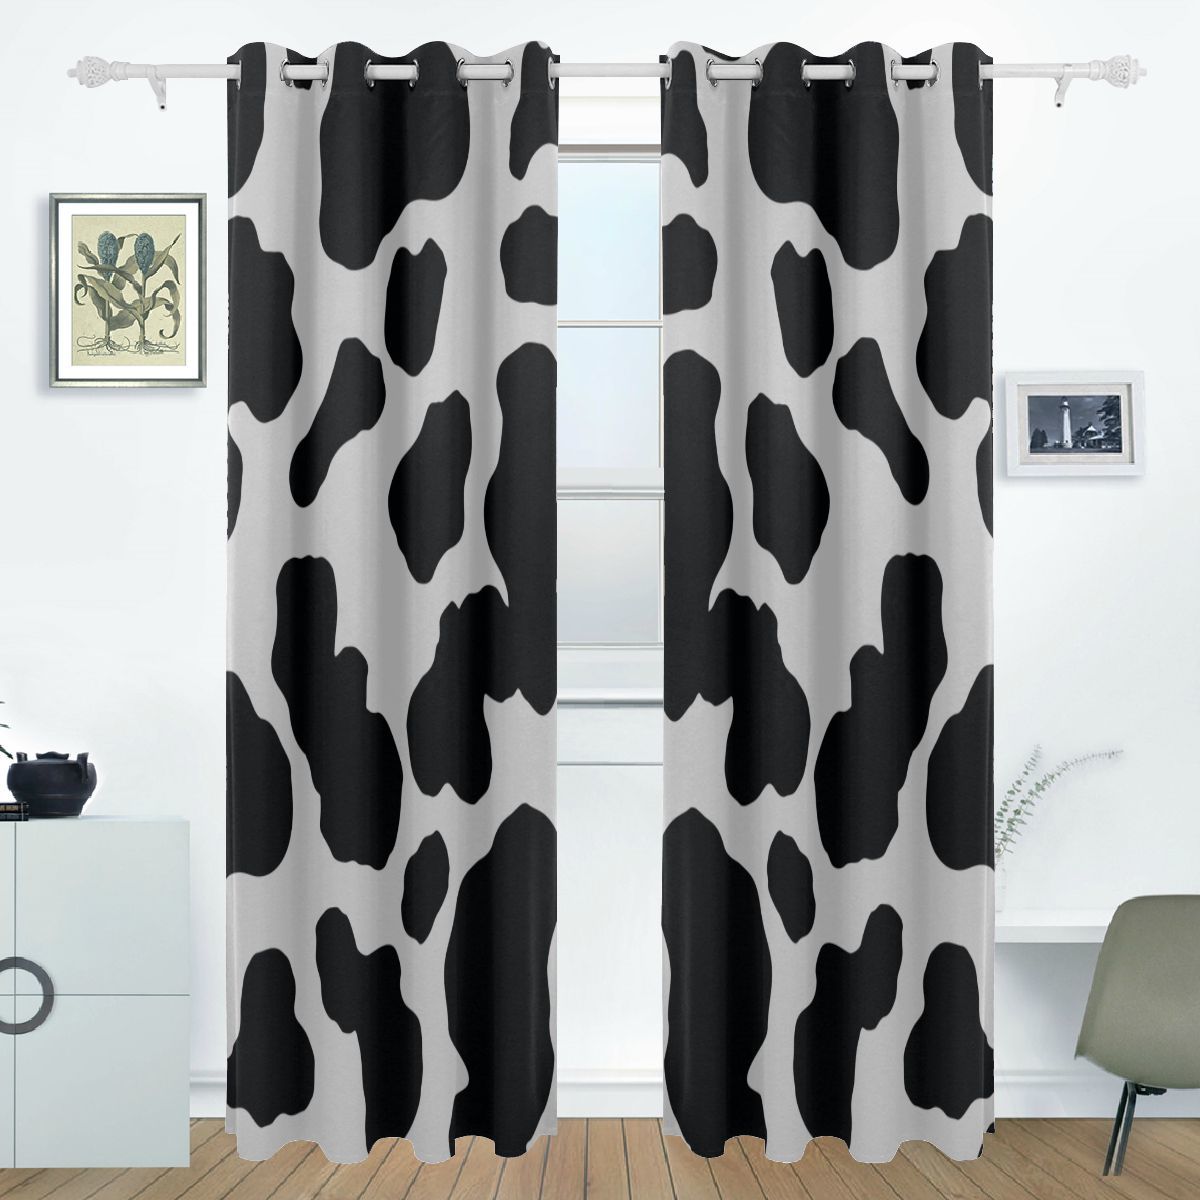 Blackout Living Room Curtains Black And White Cow Print Print Window Curtains Fo - Window